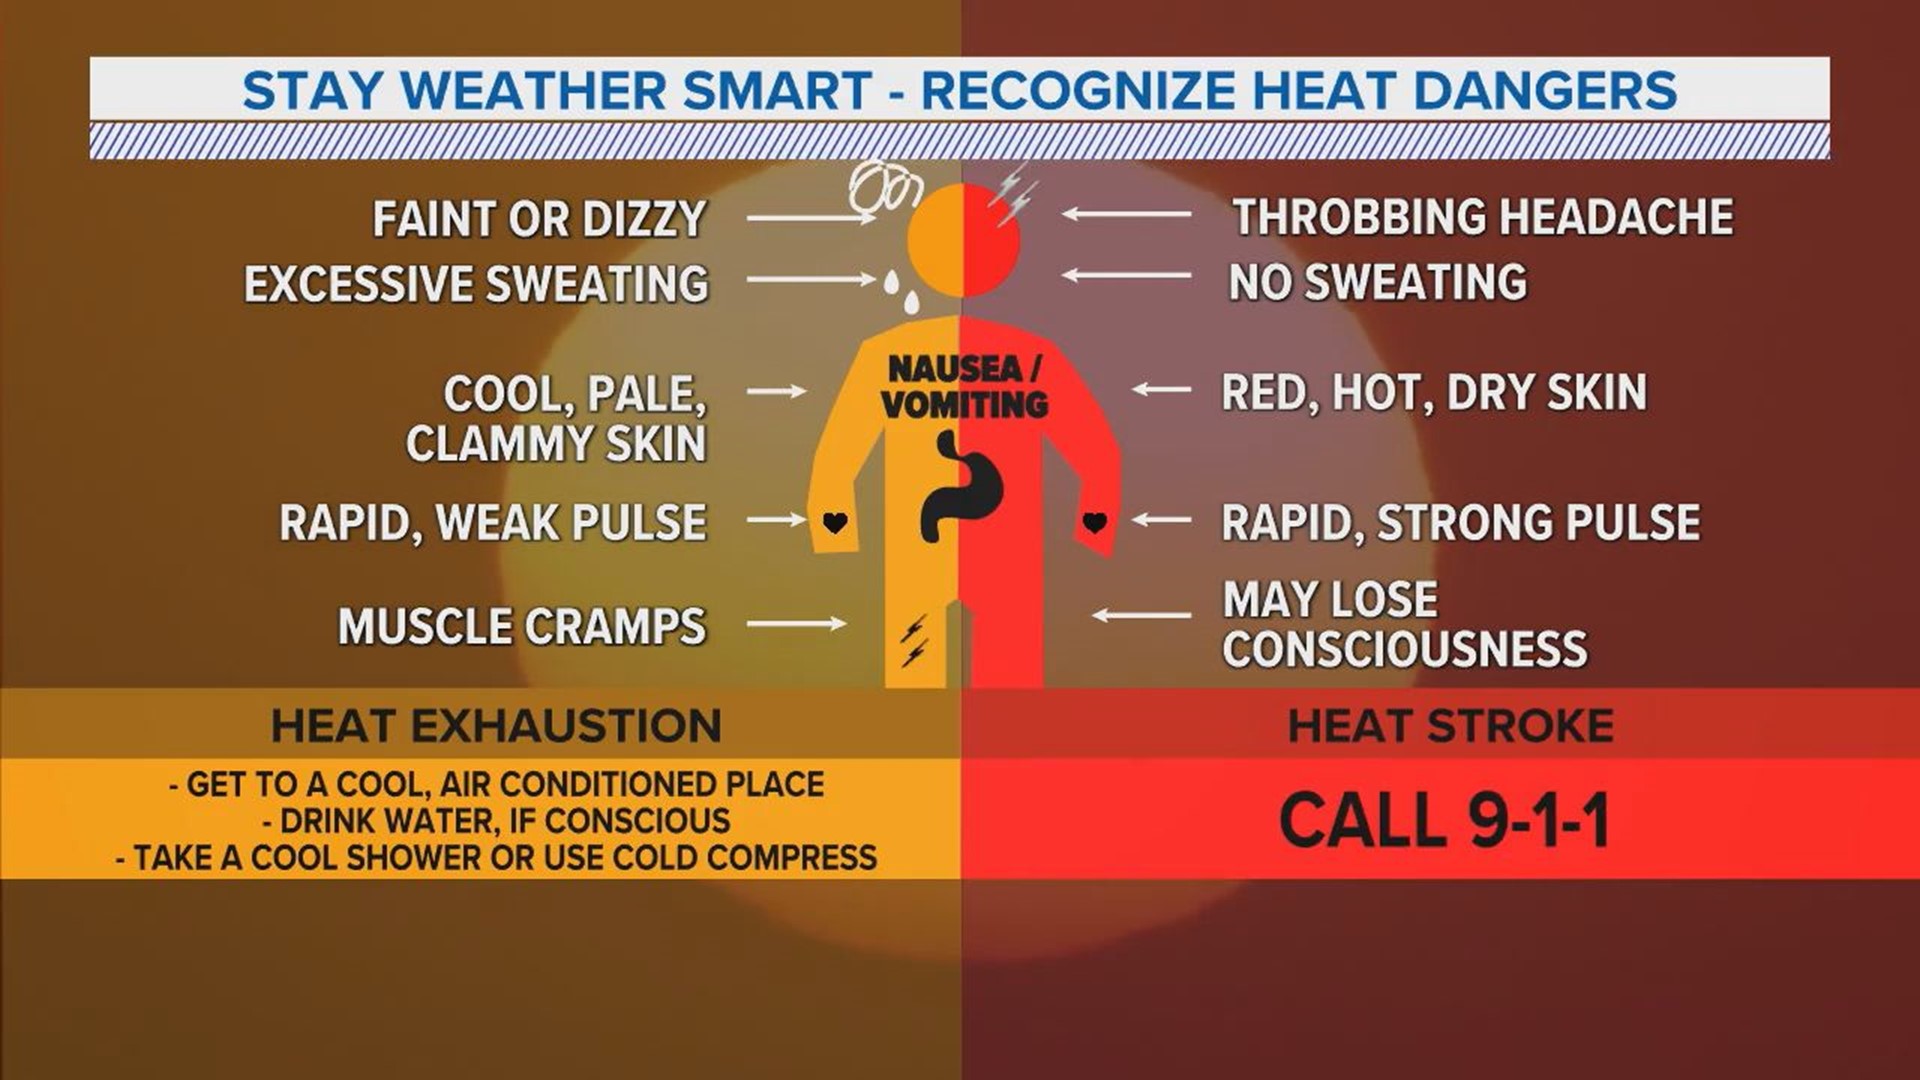 Heat index values in the triple digits could be harmful to your health if you're not prepared.